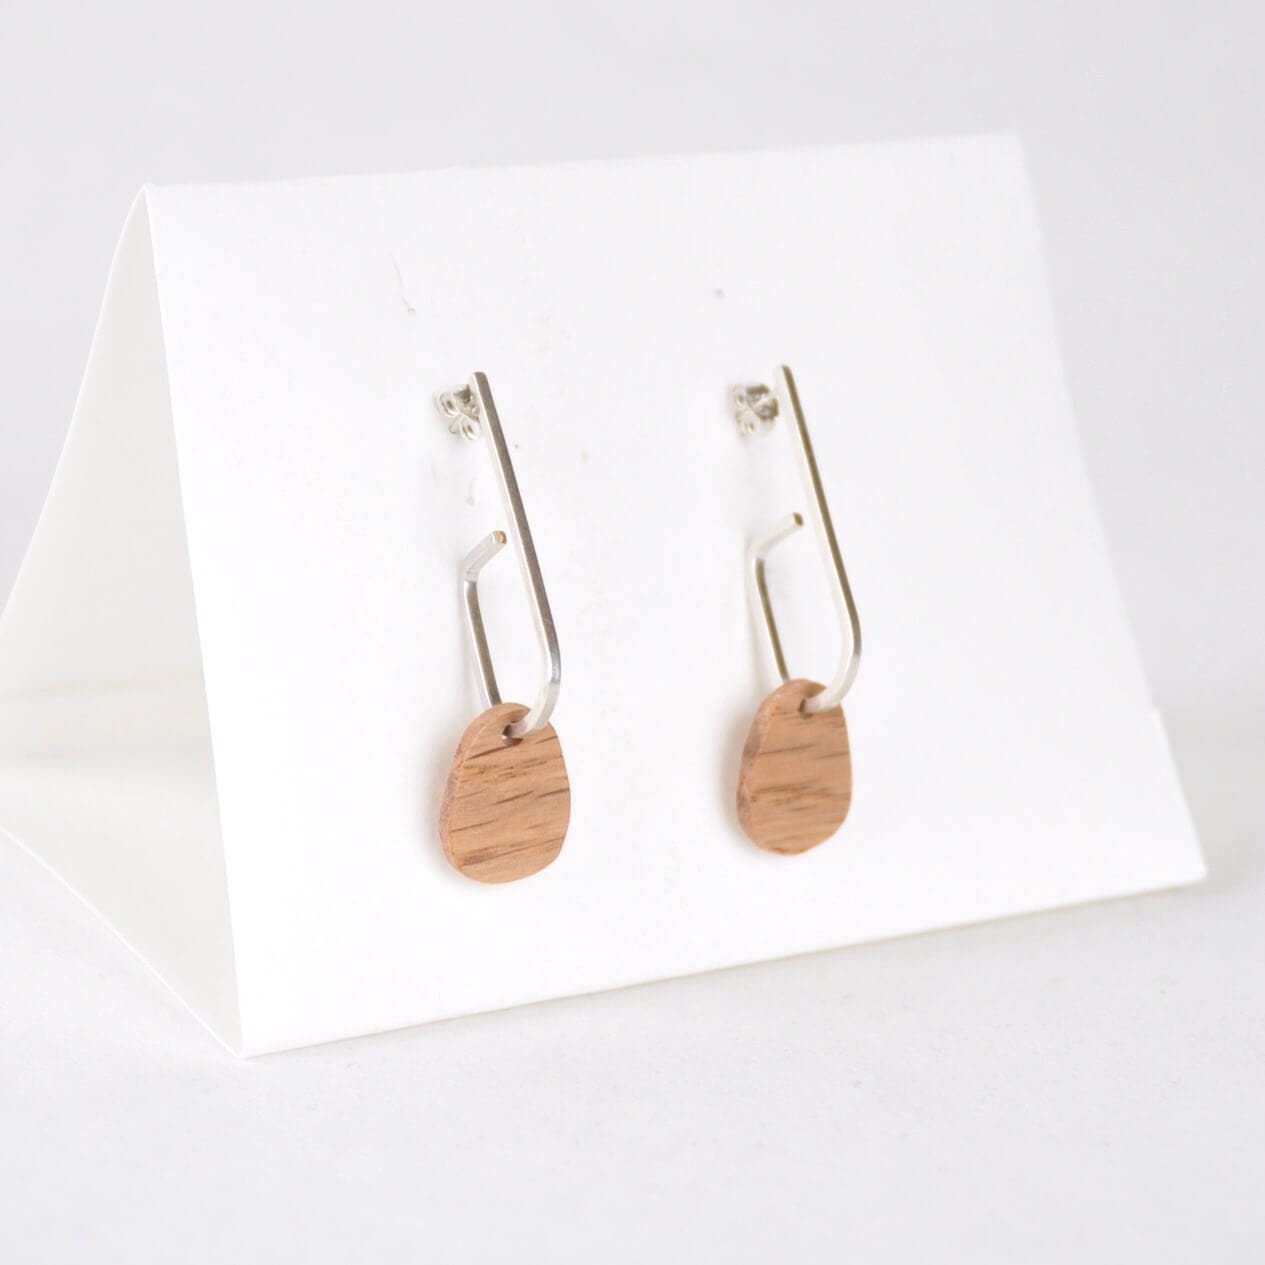 Priormade Woods c - Oak ‘Jay x Wood ’ - Eco Silver and Reclaimed Wooden Earrings (multiple styles)